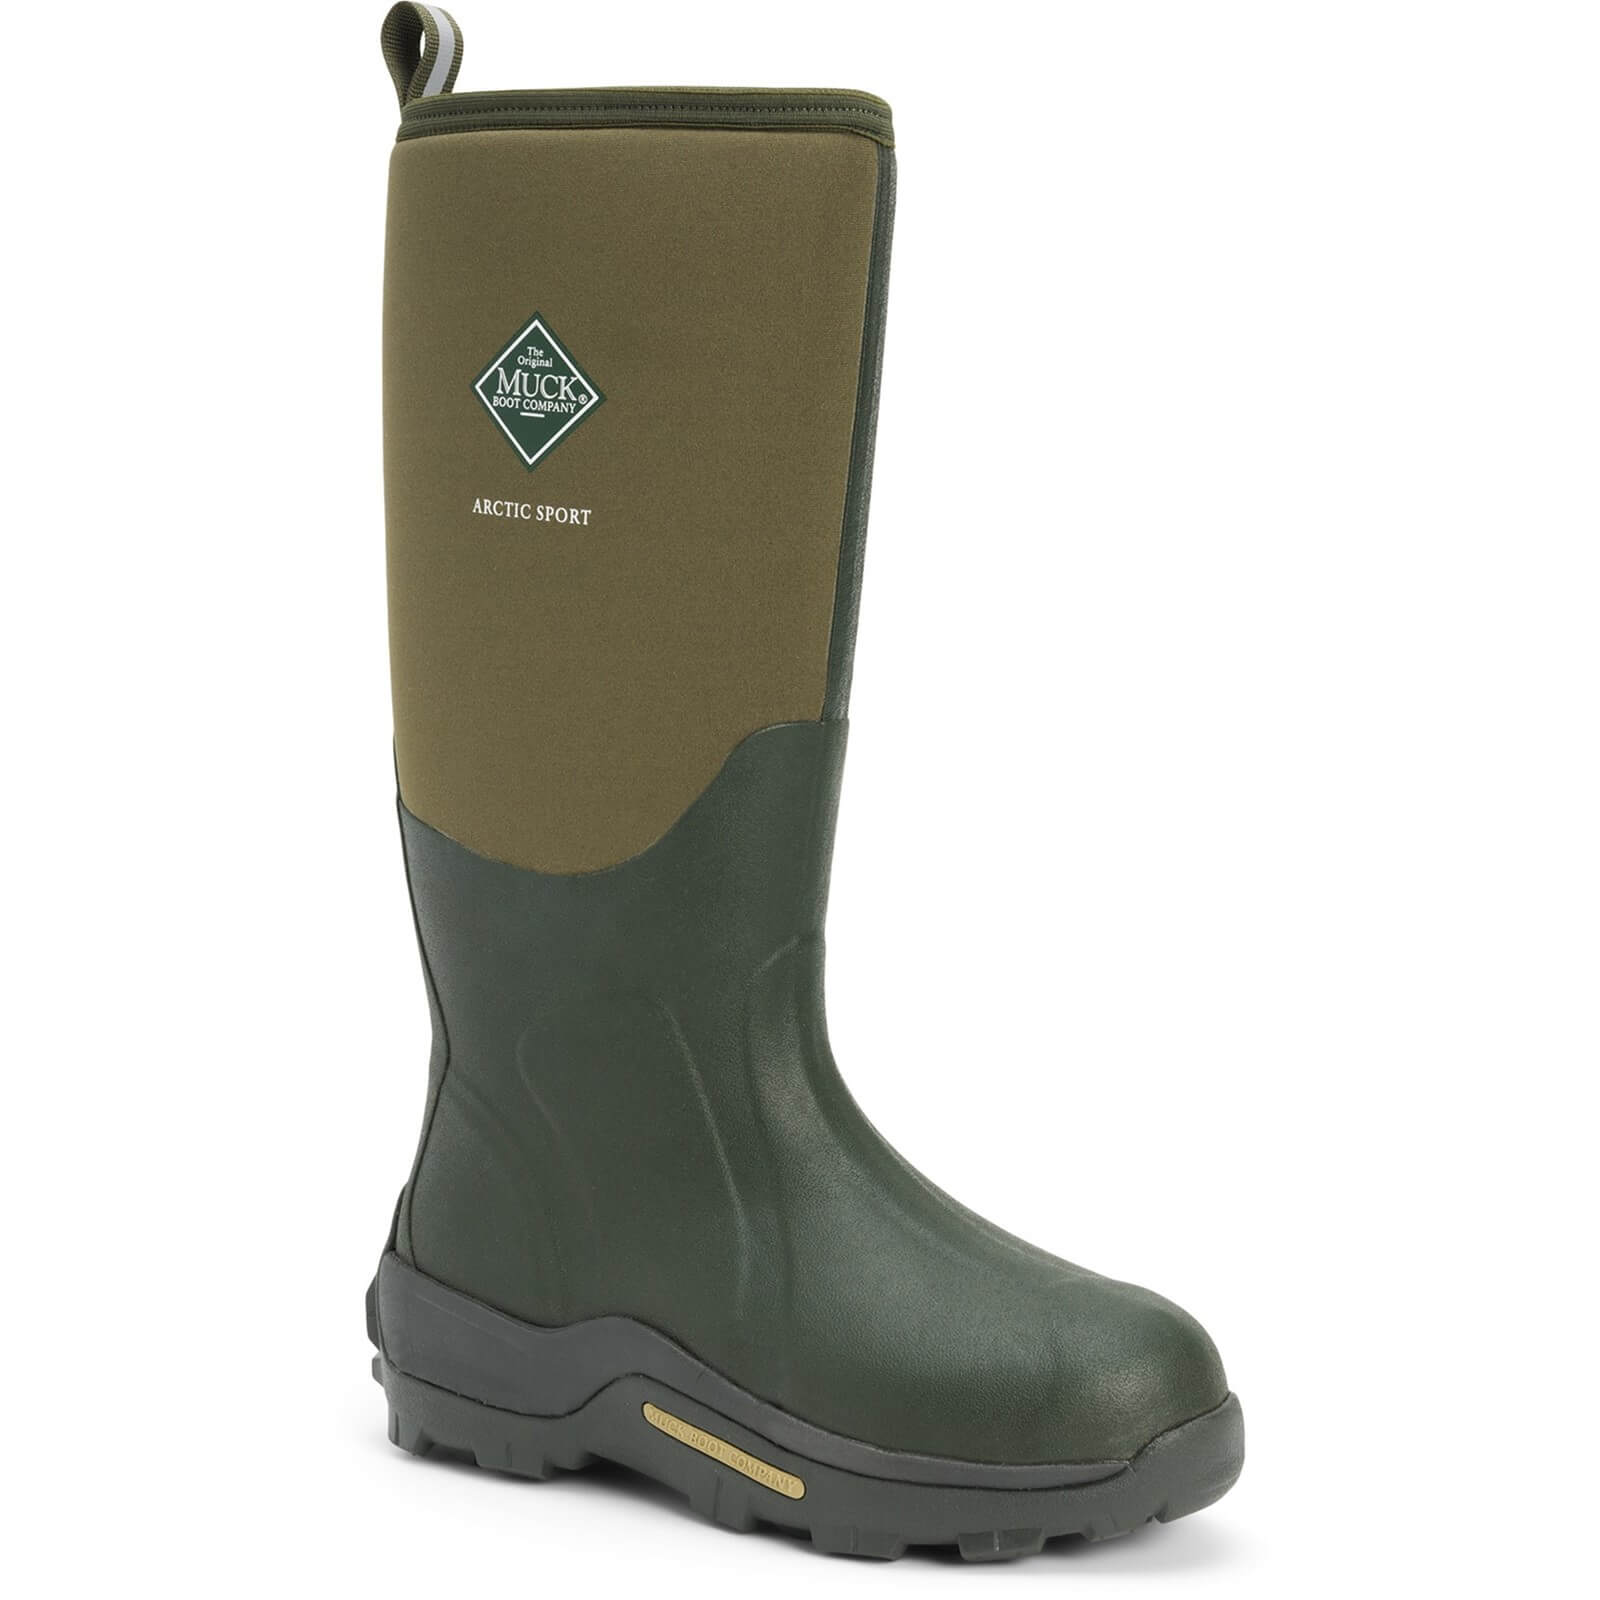 Muck Boots Arctic Sport Pull On Wellington Boots - Sale